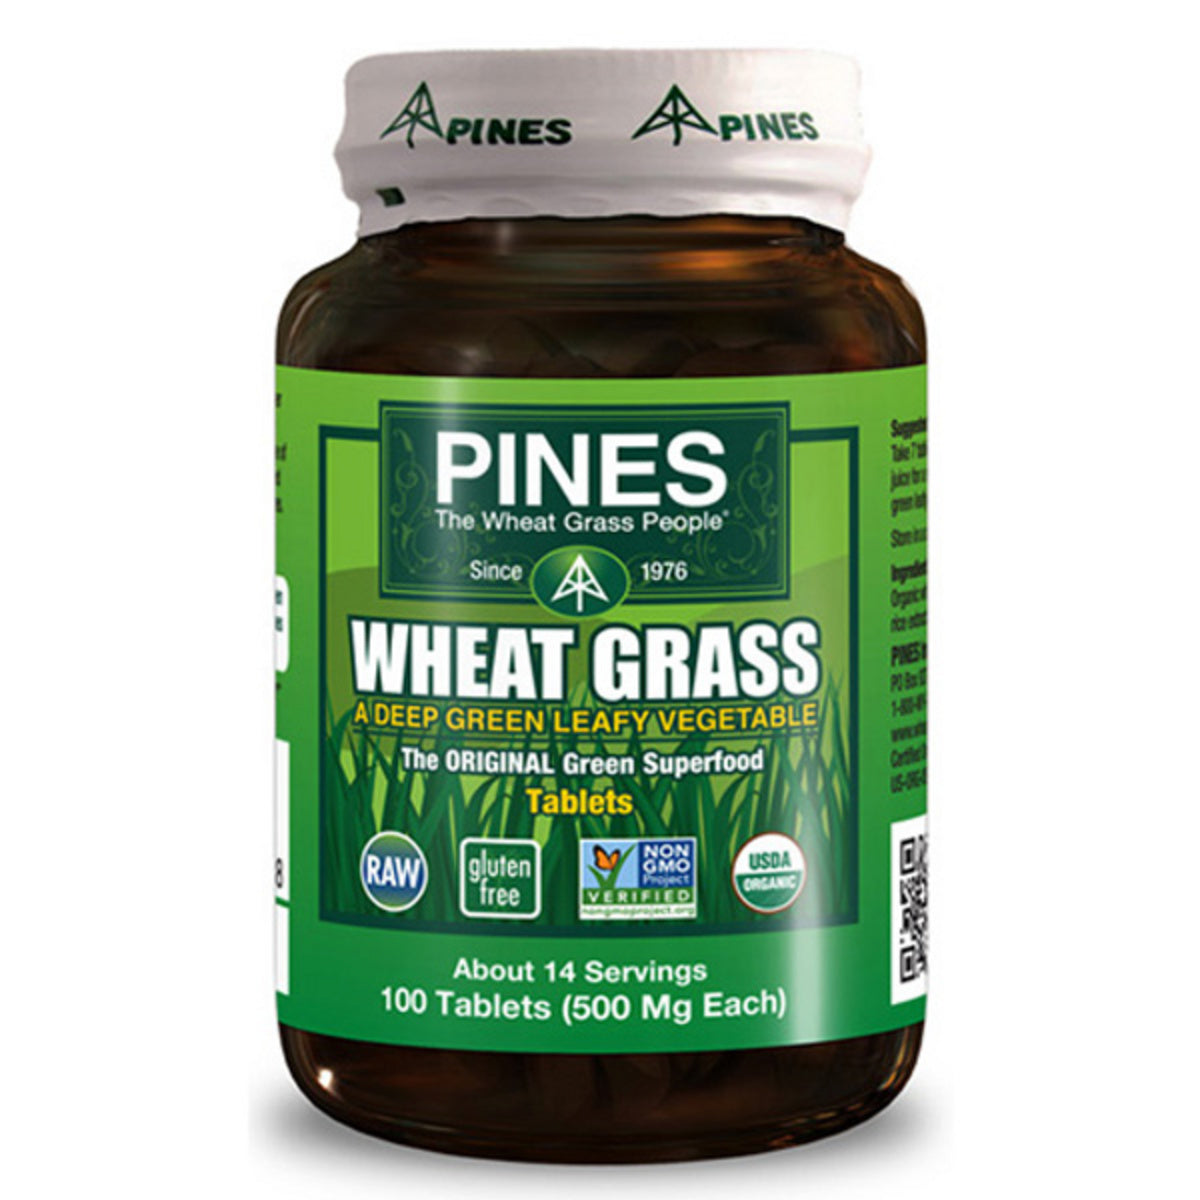 Primary image of Wheat Grass 500mg